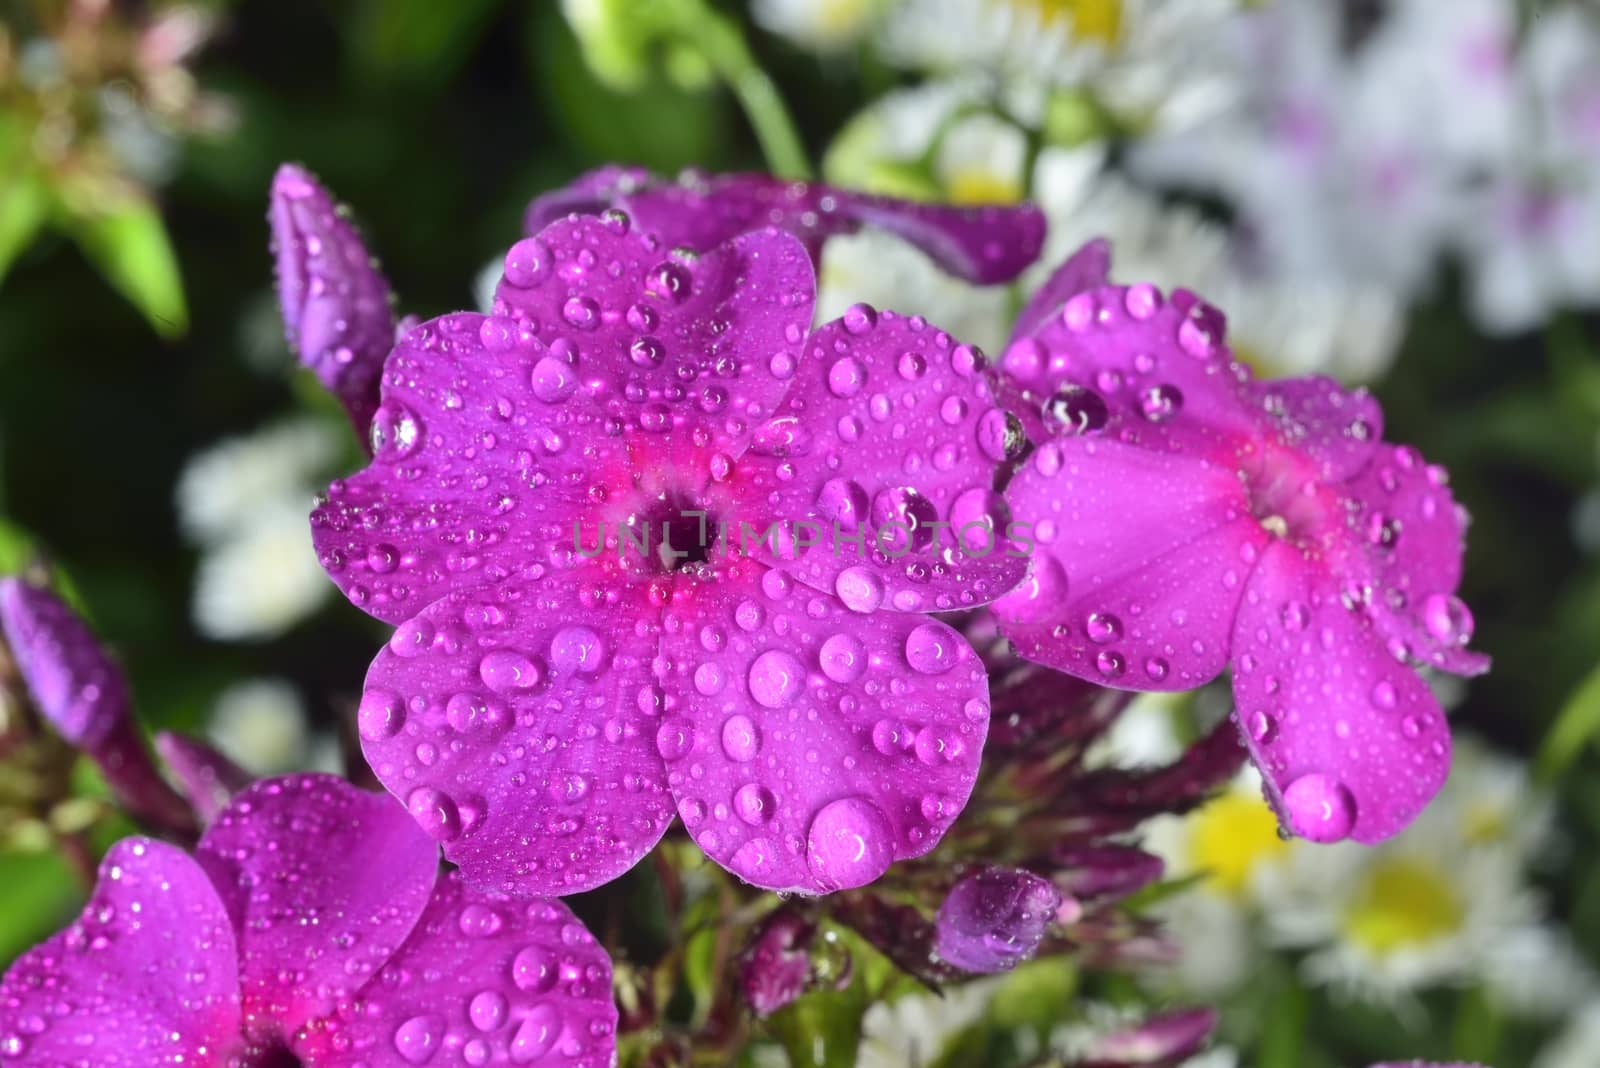  phlox  with big waterdrops by alexandervedmed